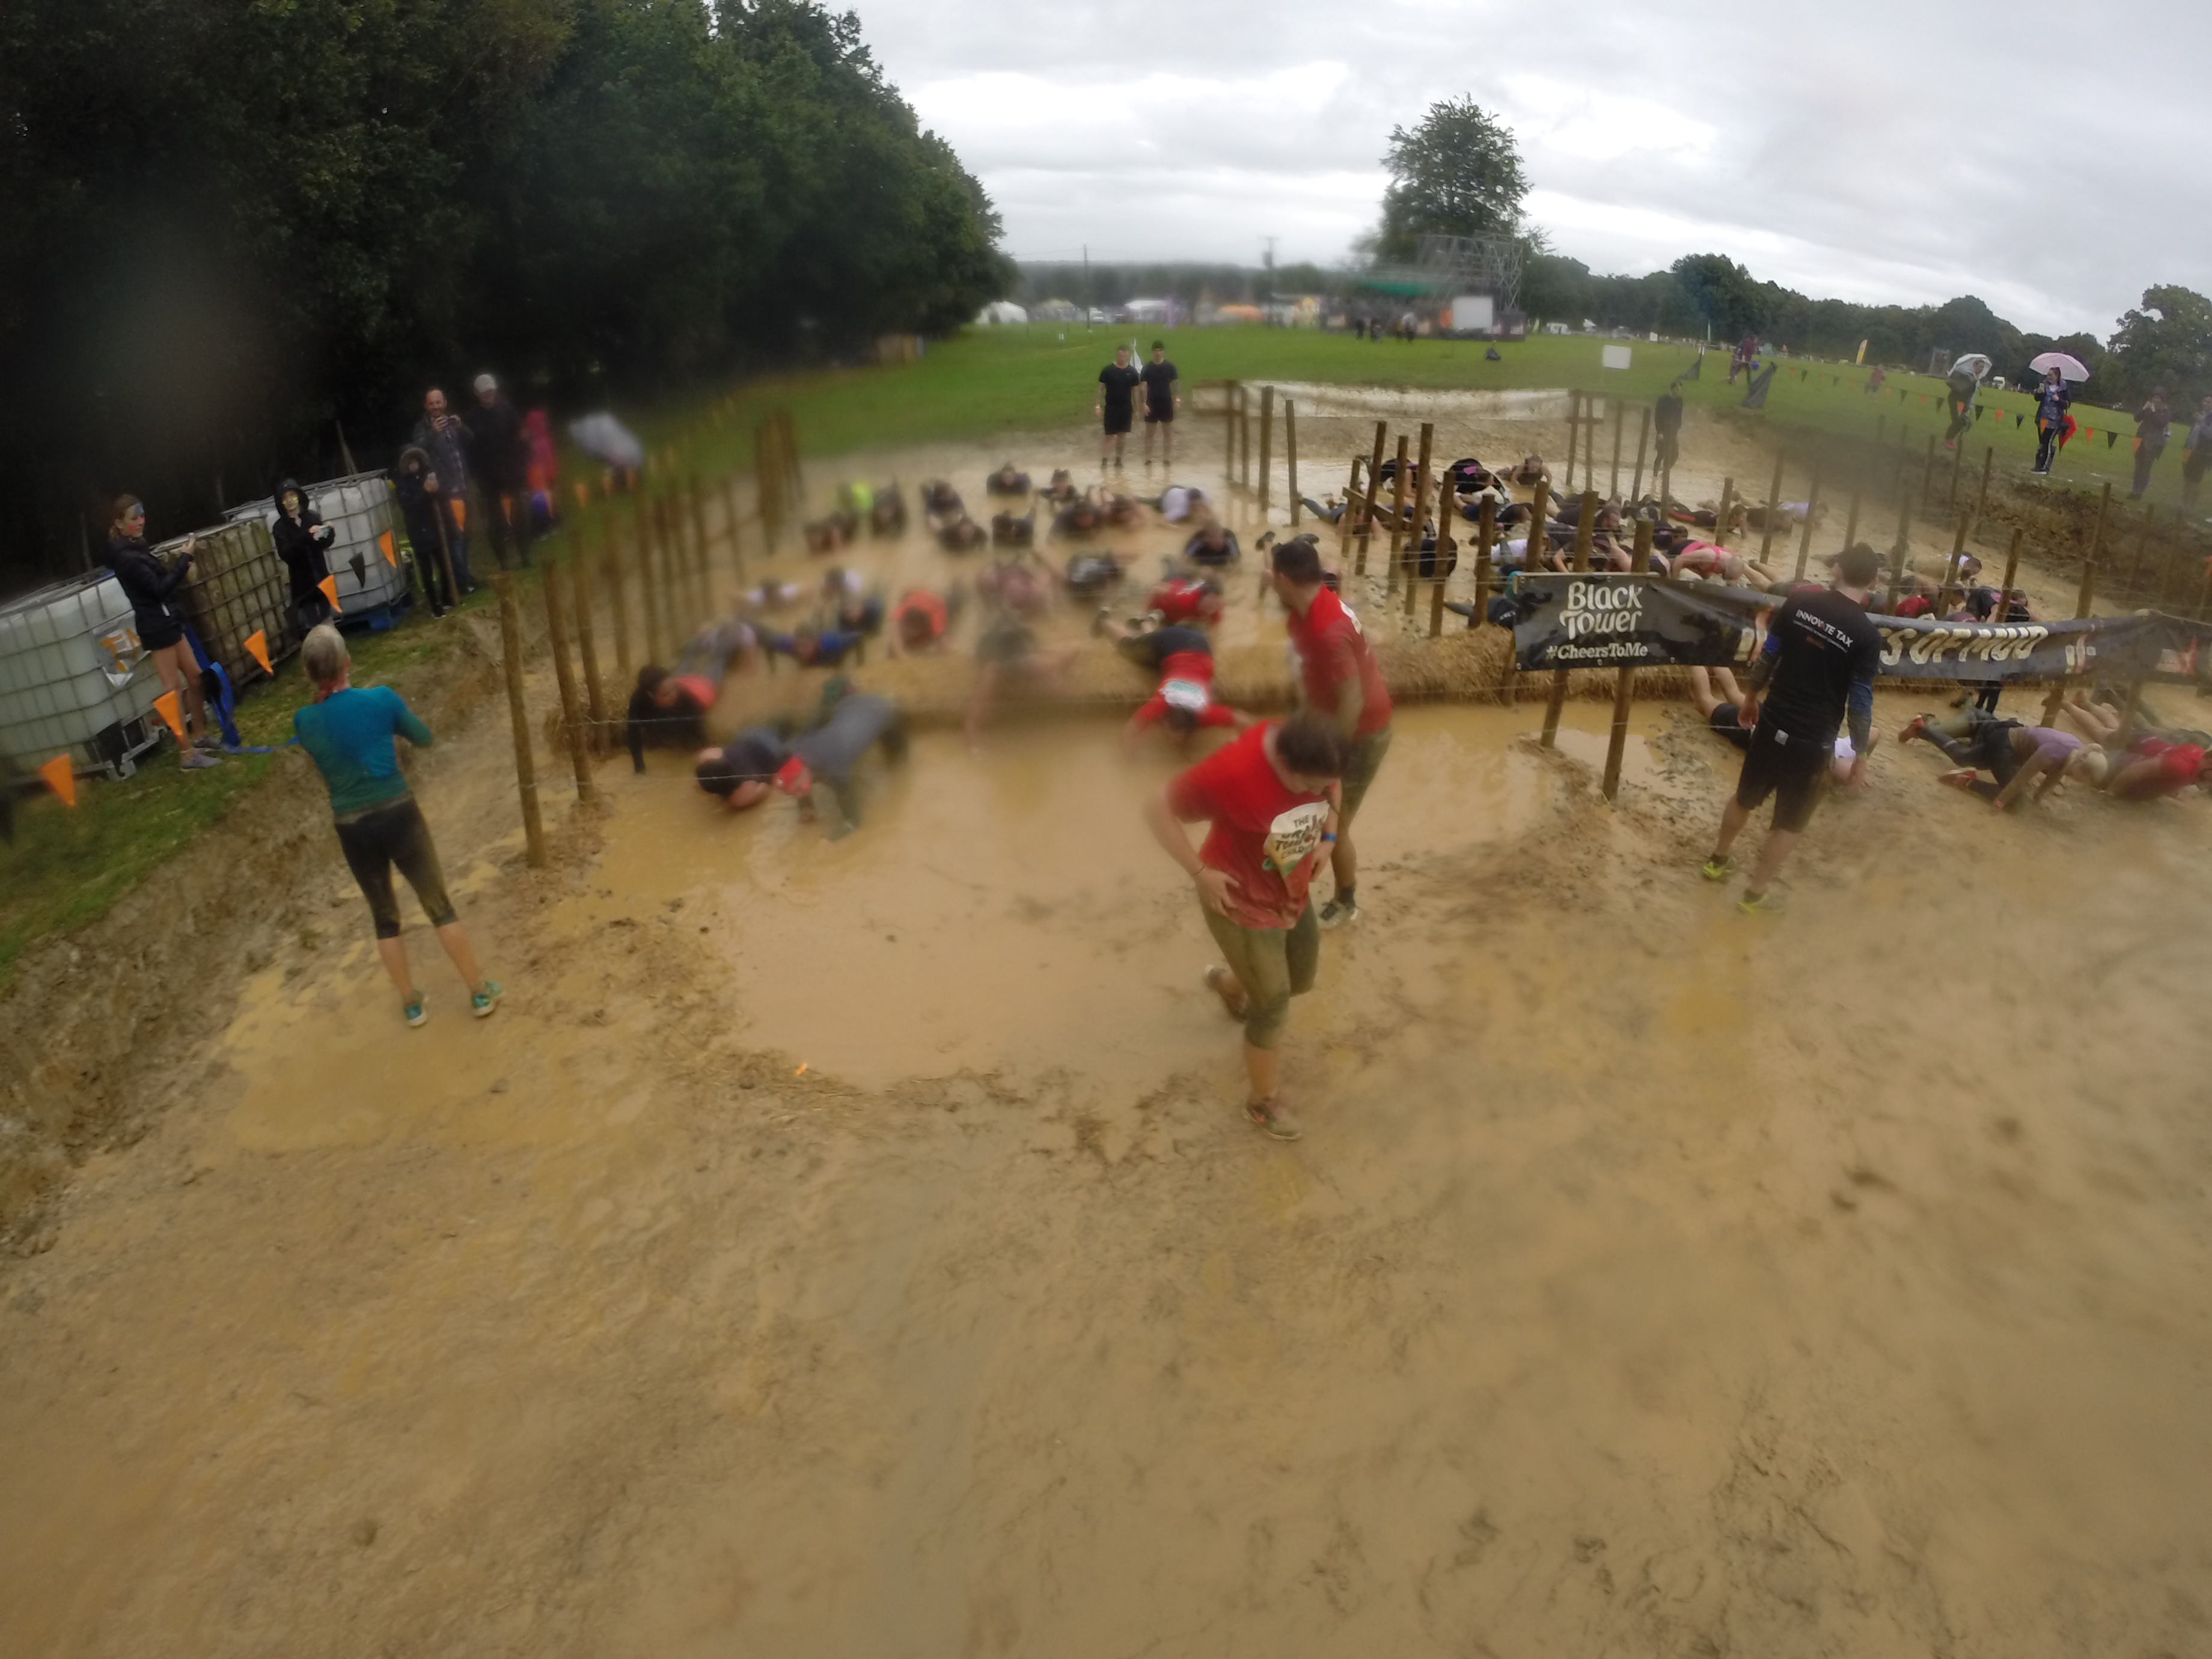 Go Pro photo from tough mudder - after completing a muddy trench